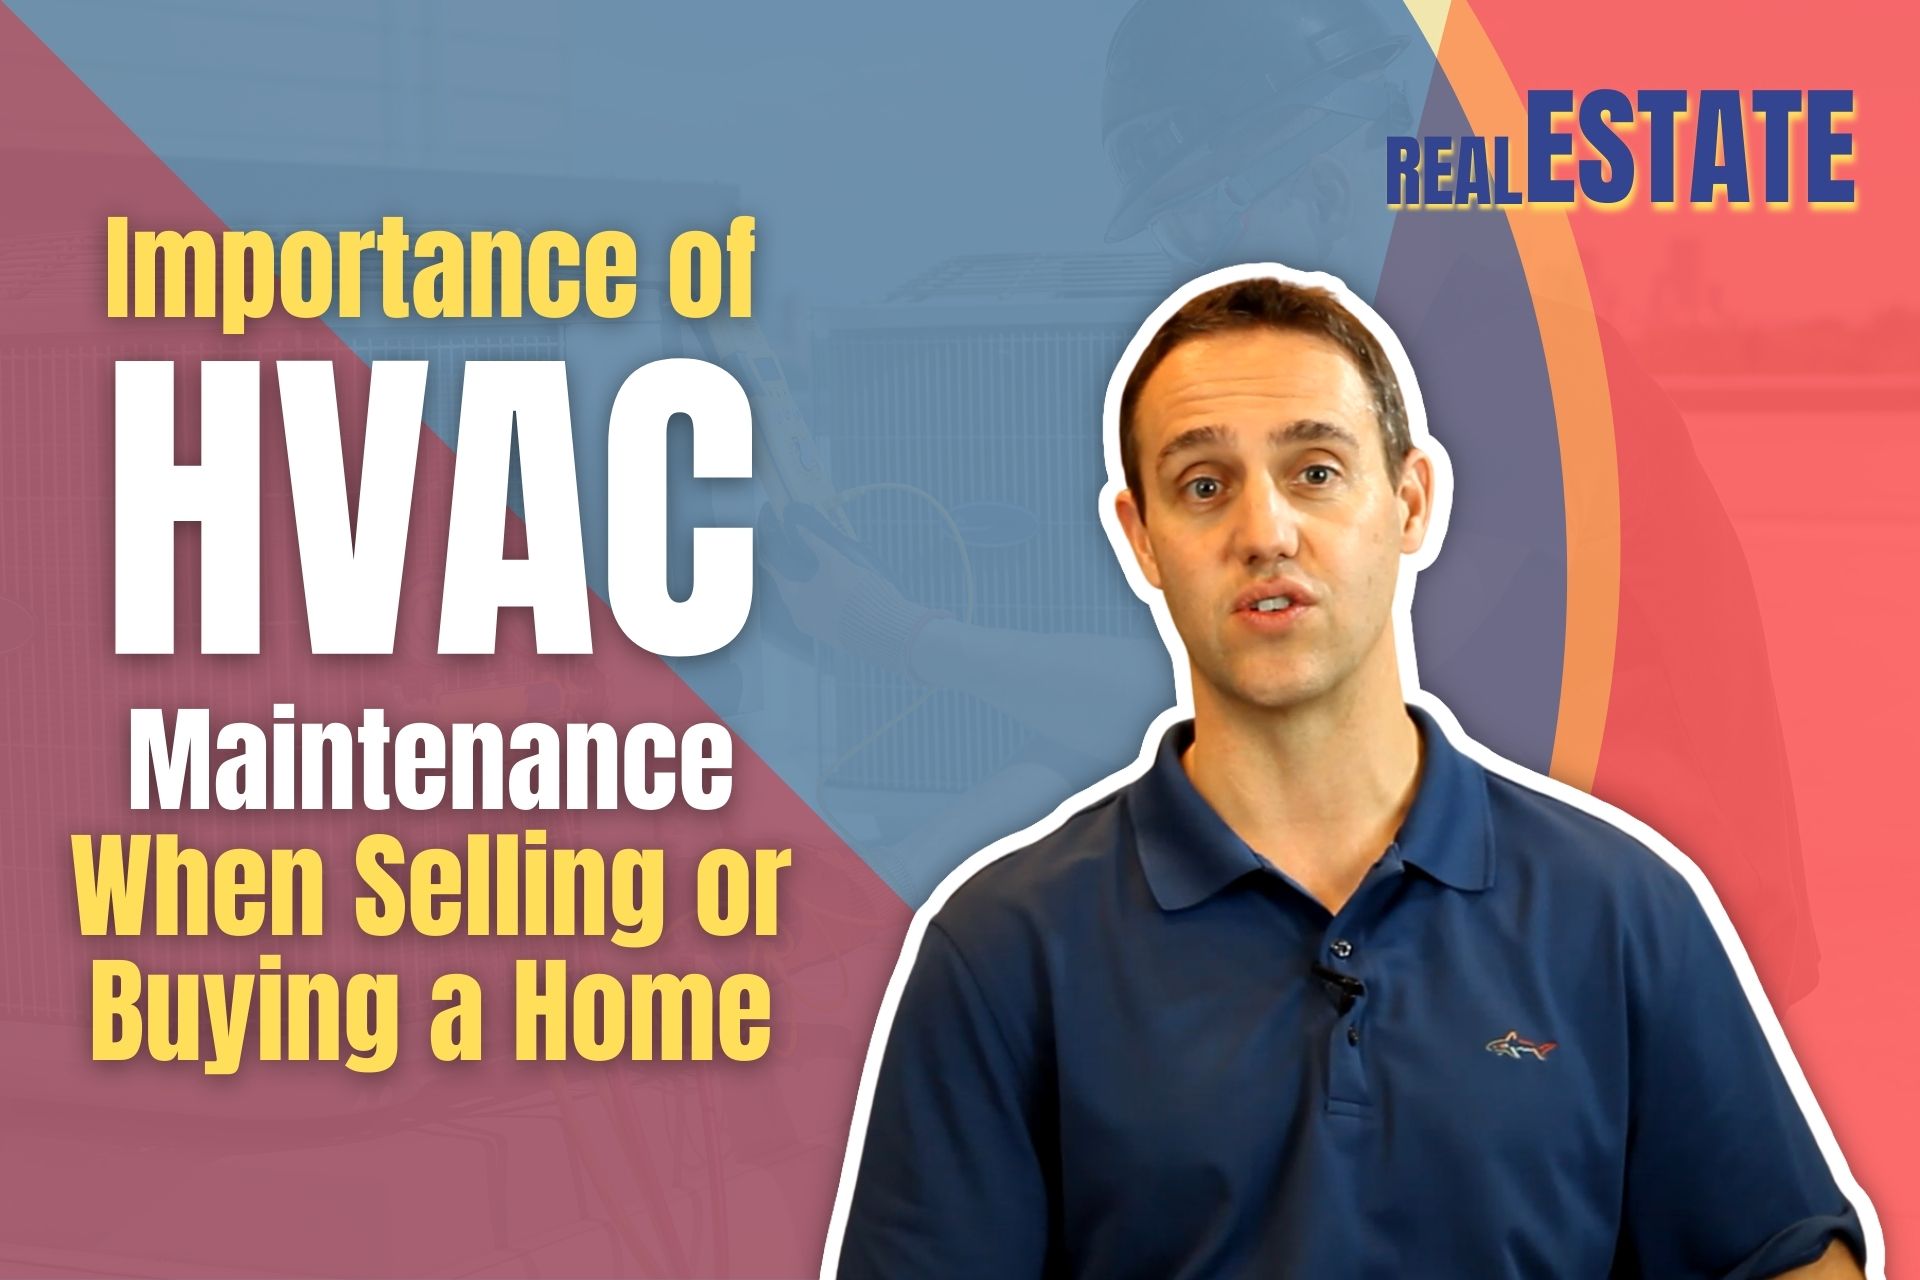 Importance of HVAC Maintenance When Selling or Buying a Home